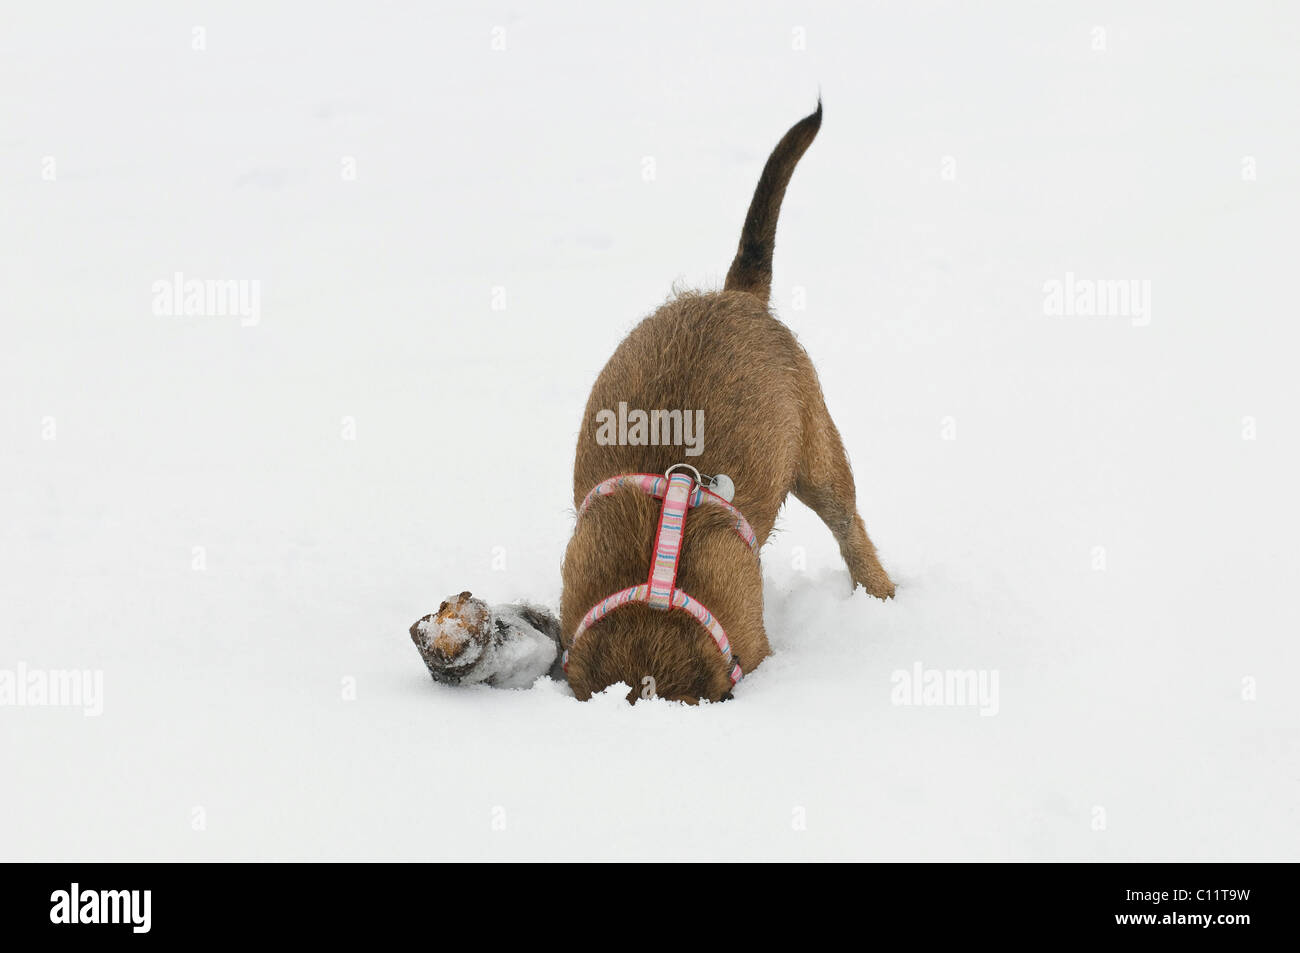 Terrier crossbreed digging next to a branch with his head stuck in the snow Stock Photo